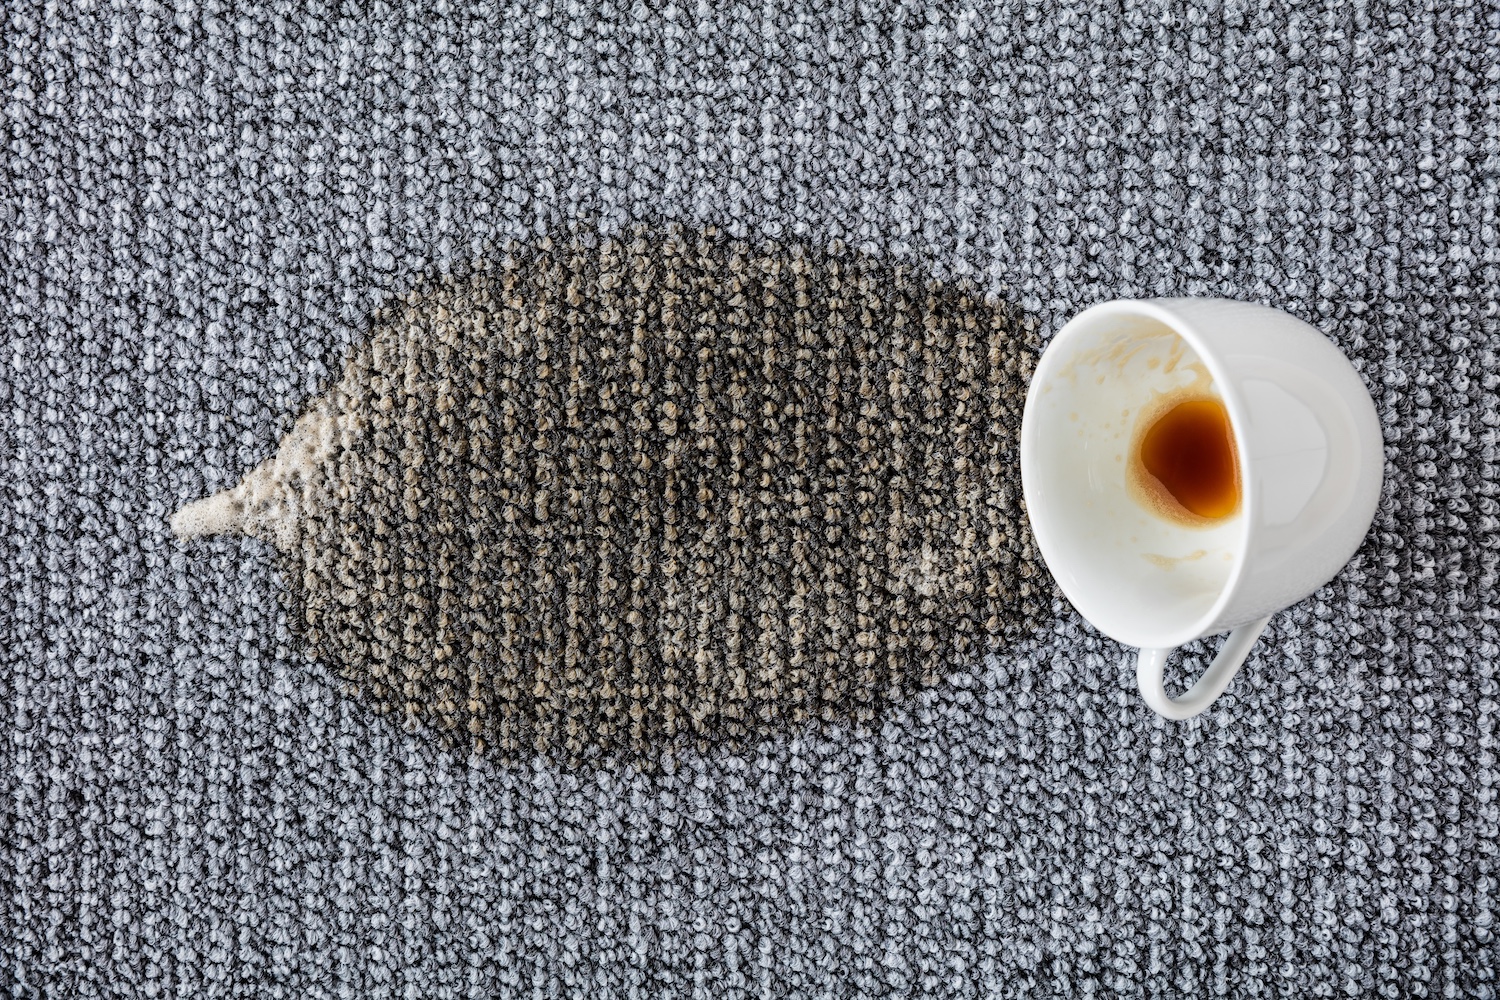 Carpet tile with coffee spill - cleaning carpet tiles top tips